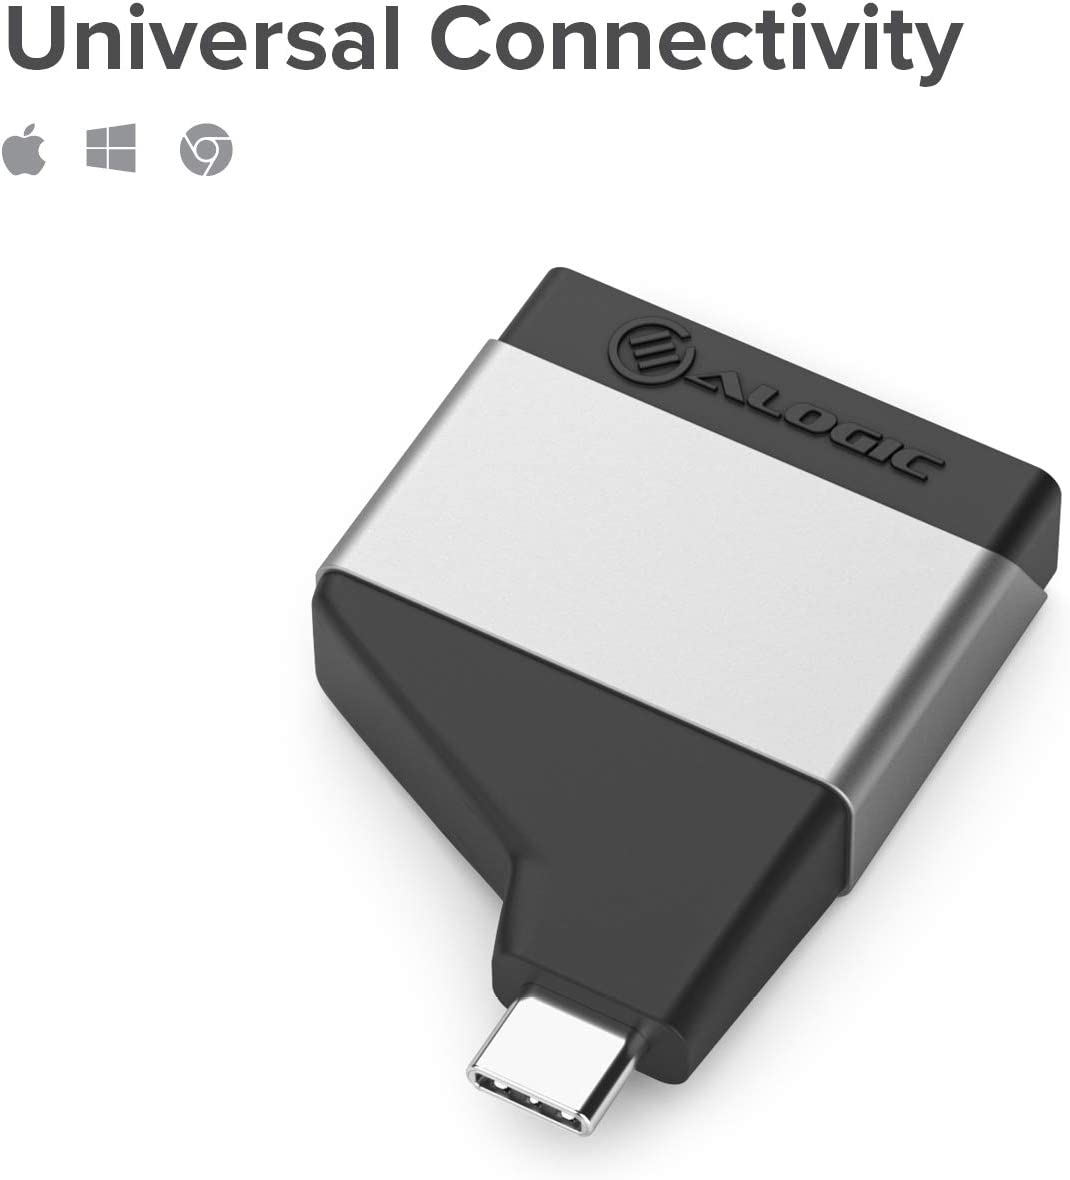 ALOGIC USB C to SD and Micro SD Mini Adapter, Compatible with MacBook Pro, Air, Pixel Book, XPS, Surface, Galaxy, iPad Pro, Air 2020 and More (Thunderbolt Compatible) - Dealtargets.com